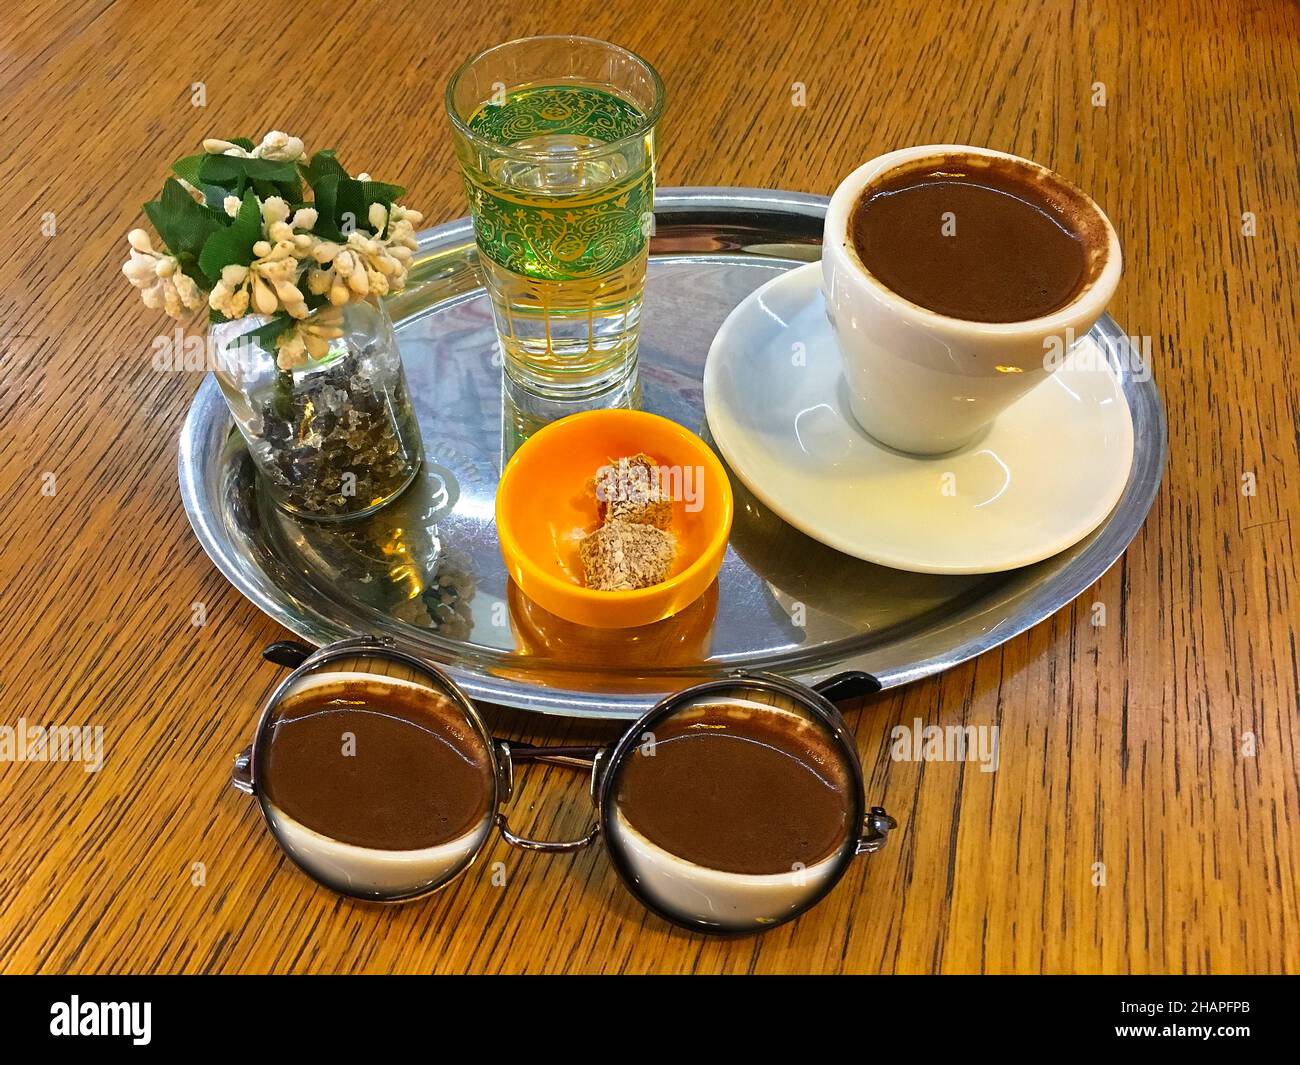 Turkish coffee cups…What makes them so special? – Kahve Cafe